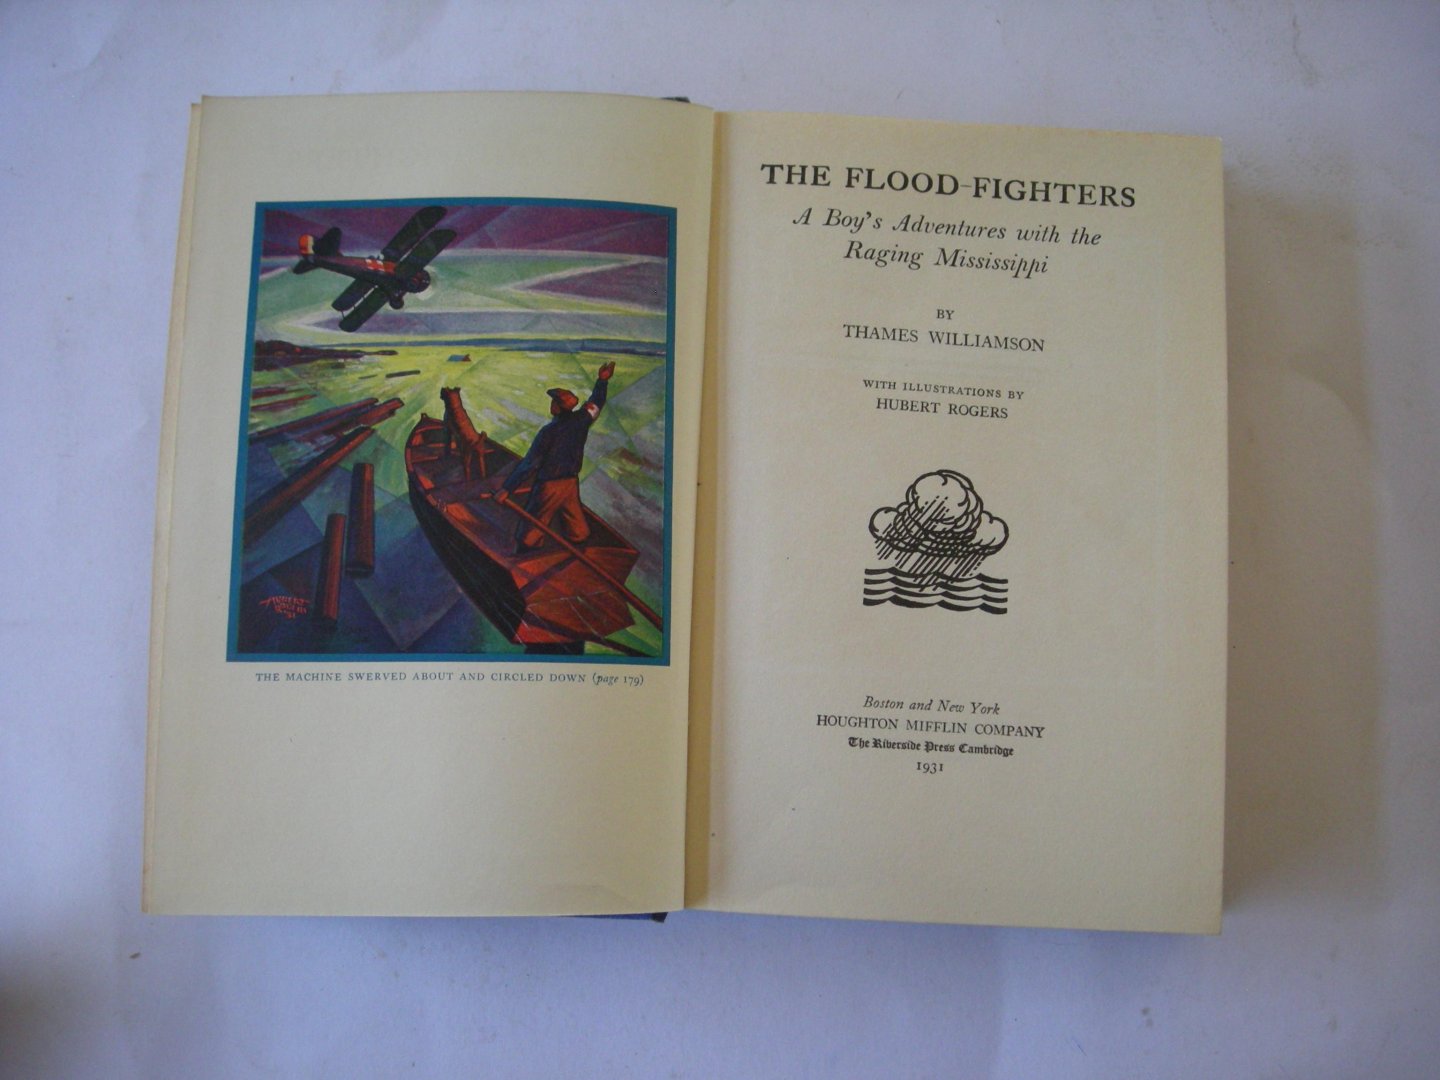 Williamson, Thames / Rogers, Hubert, ill. - The Flood-Fighters. A Boy's Adventures with the Raging Mississippi